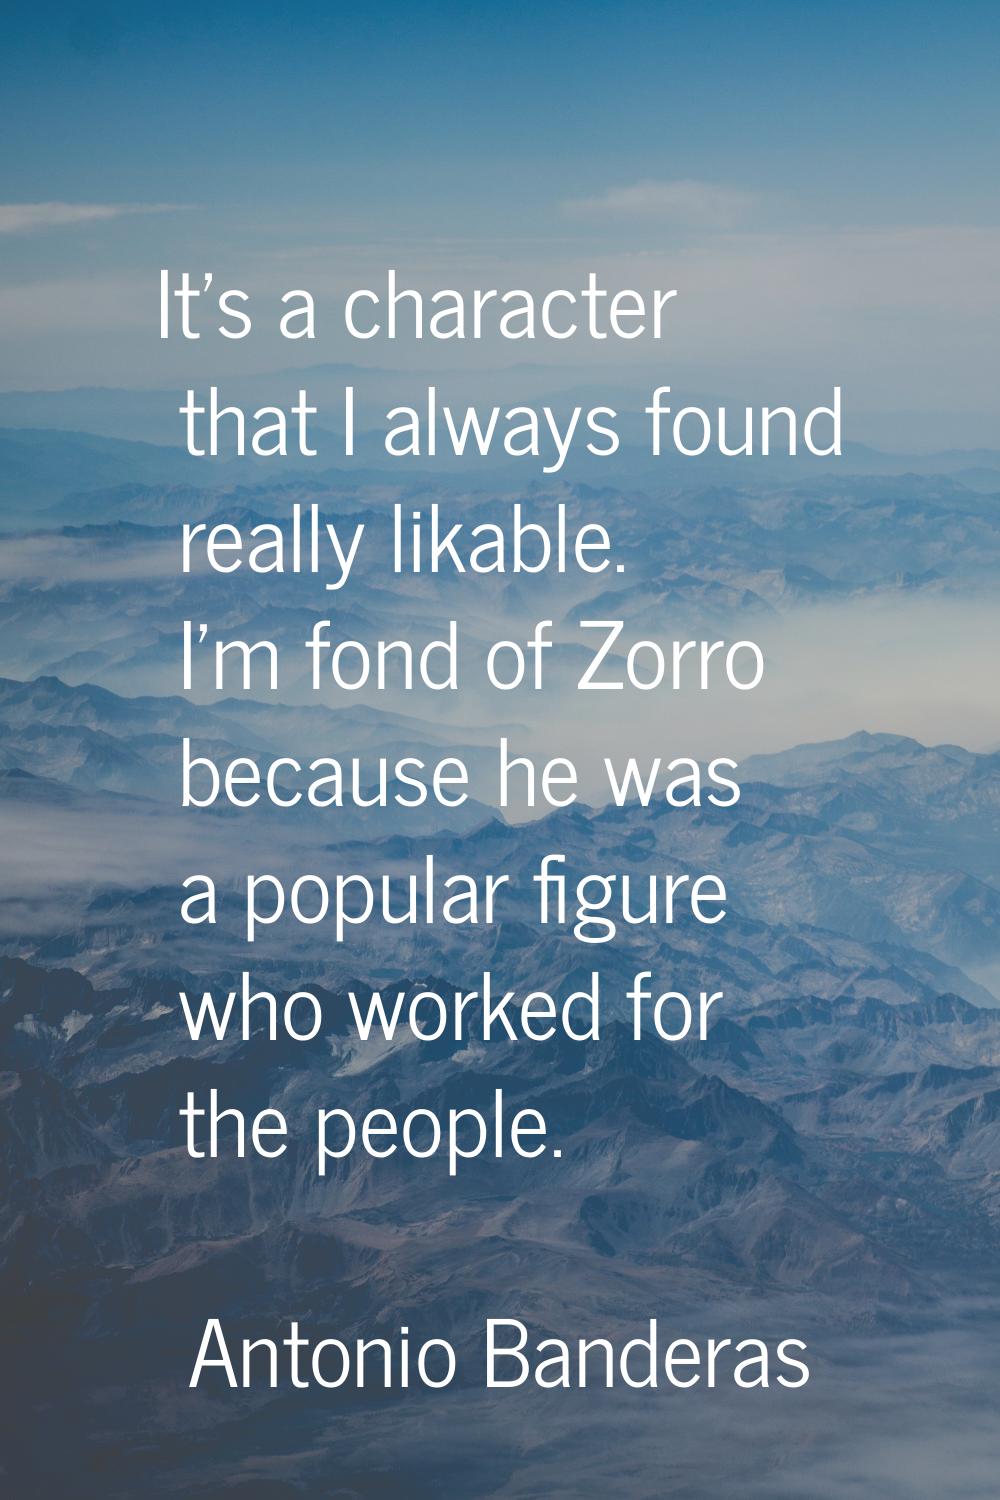 It's a character that I always found really likable. I'm fond of Zorro because he was a popular fig